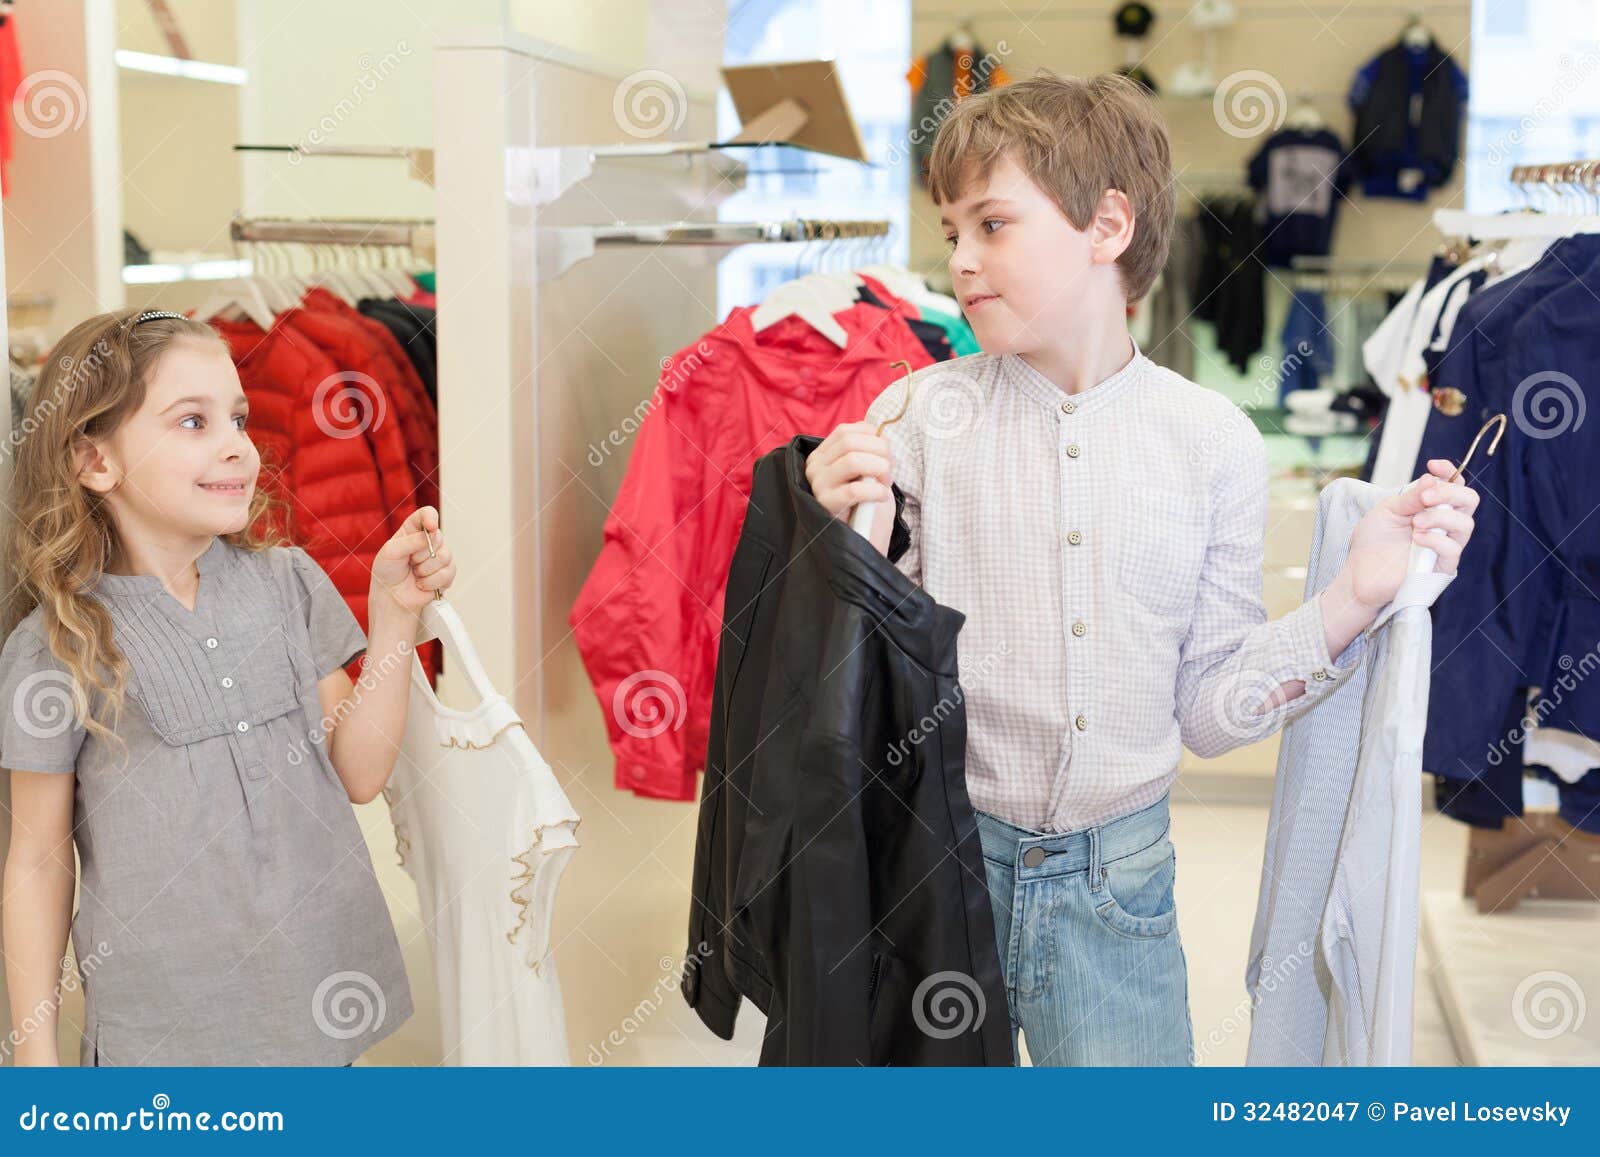 Brother with Sister Trying on Clothes in Store Stock Image - Image of ...